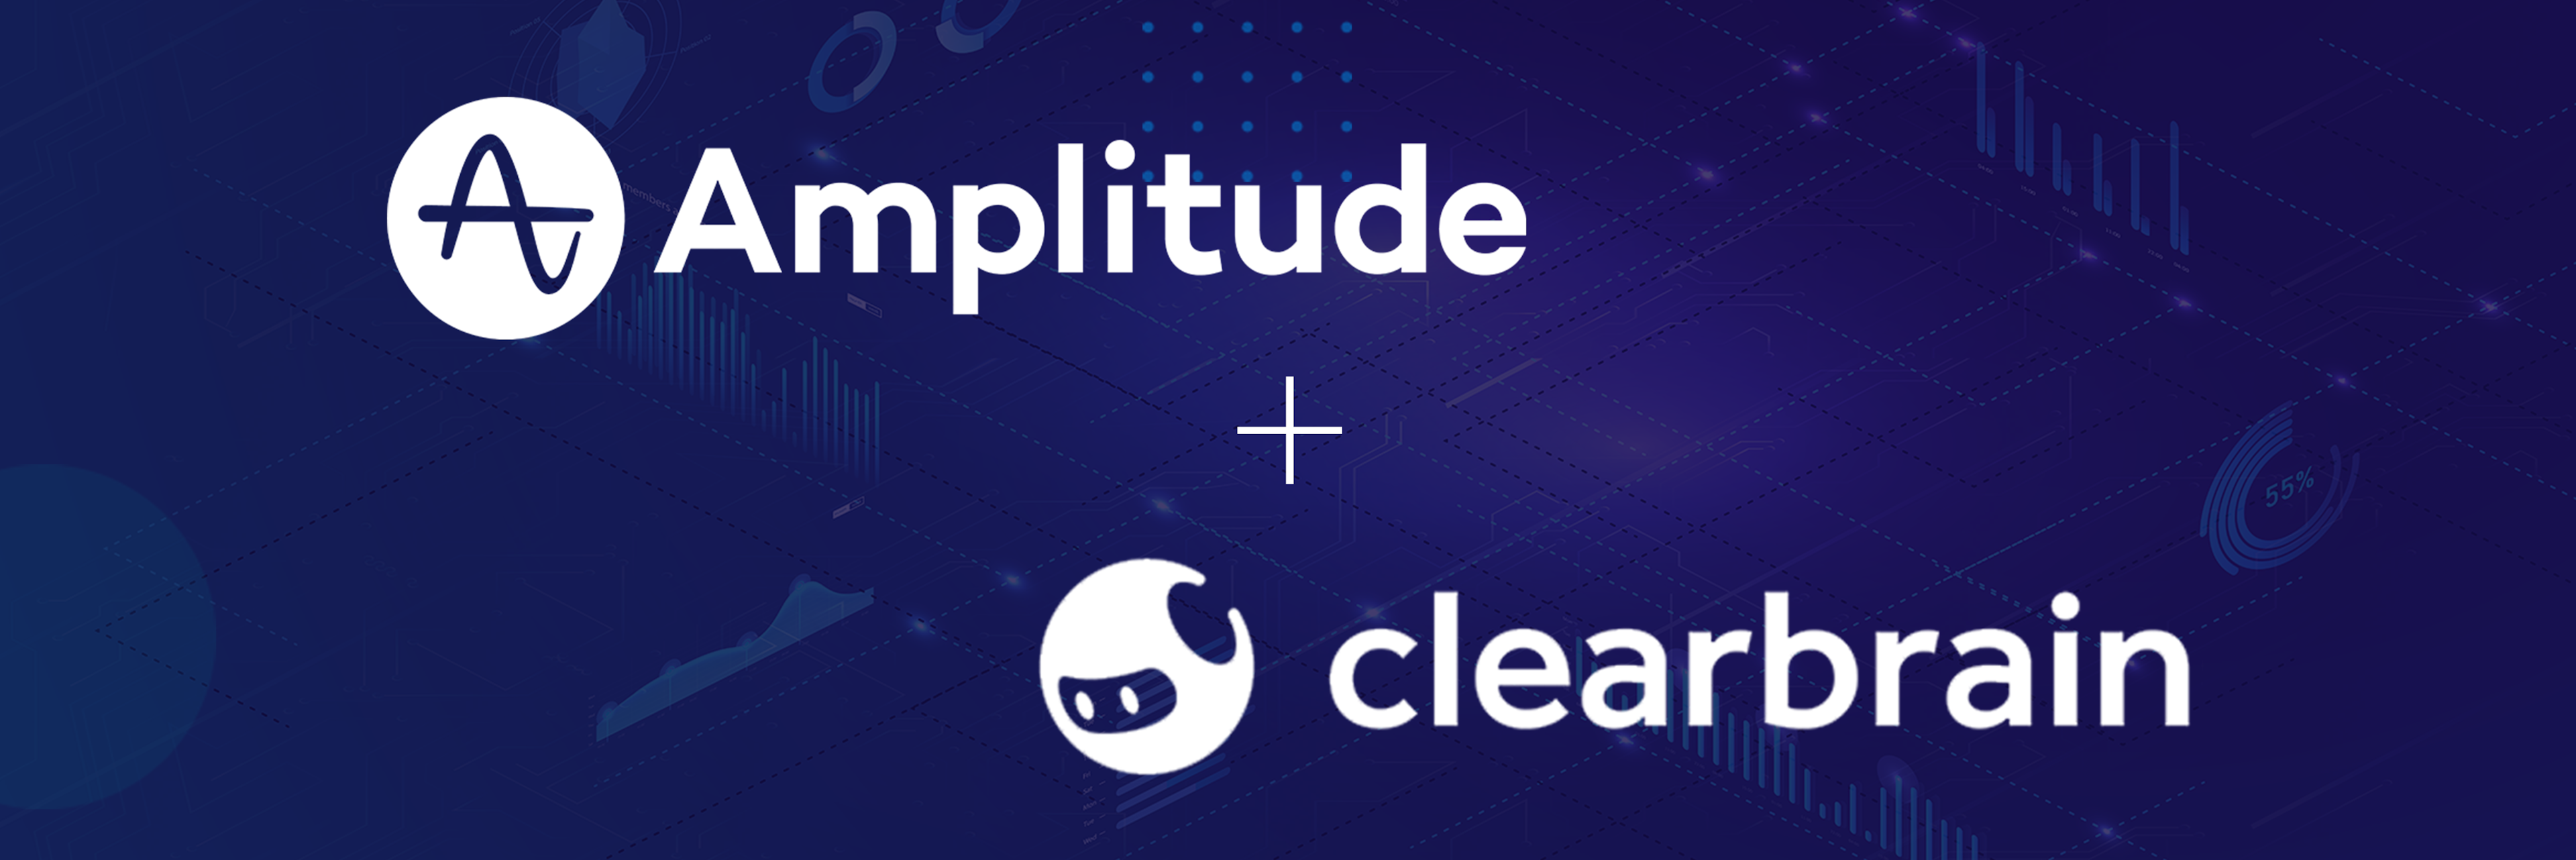 Amplitude Acquires ClearBrain to Add Predictions to Analytics